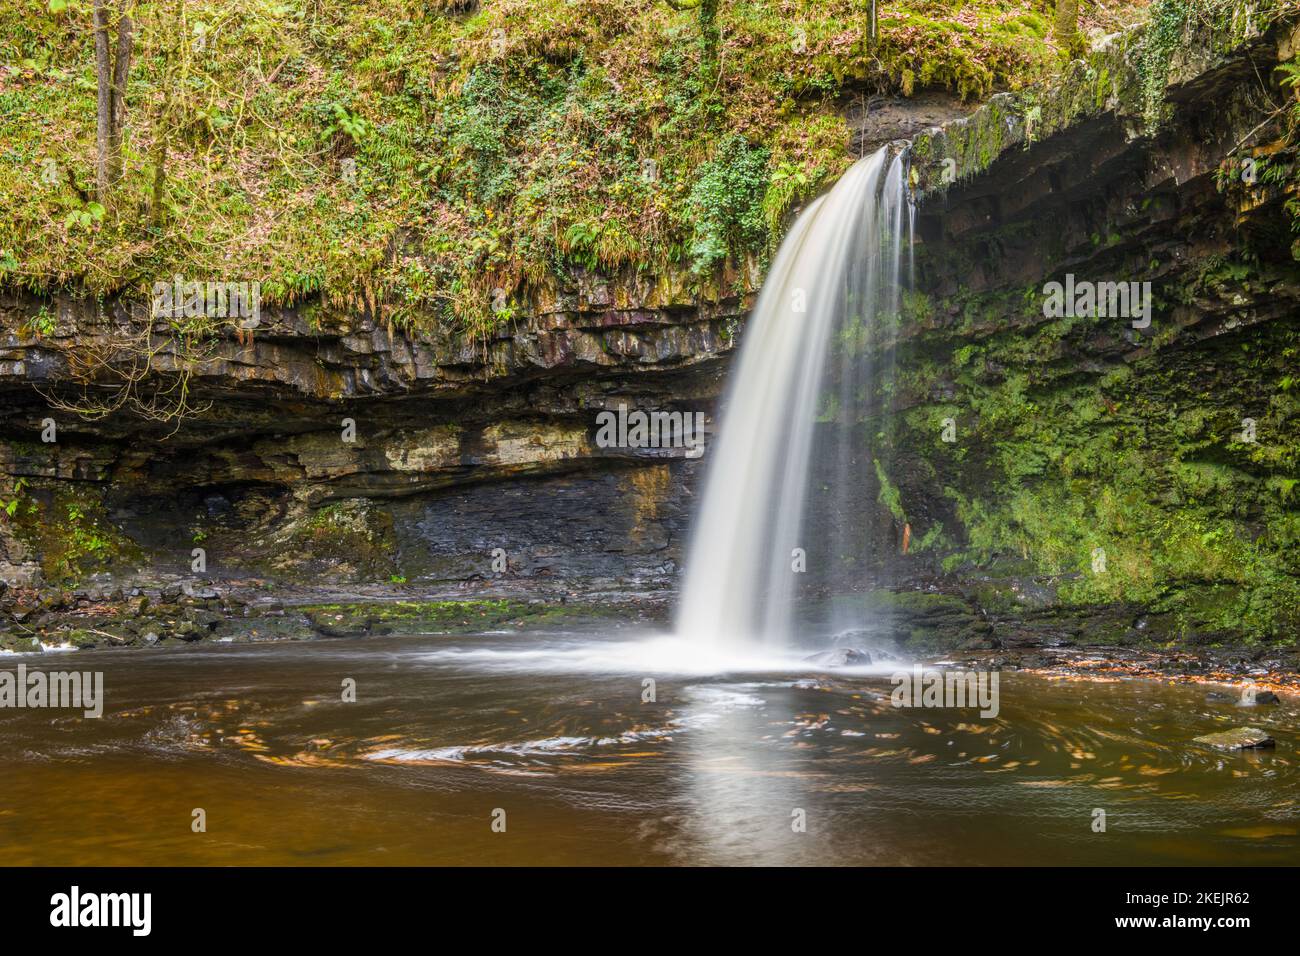 The Lady Falls or Scwd Gwladys as they are better known, on the River Pyrddin, Vale of Neath Stock Photo